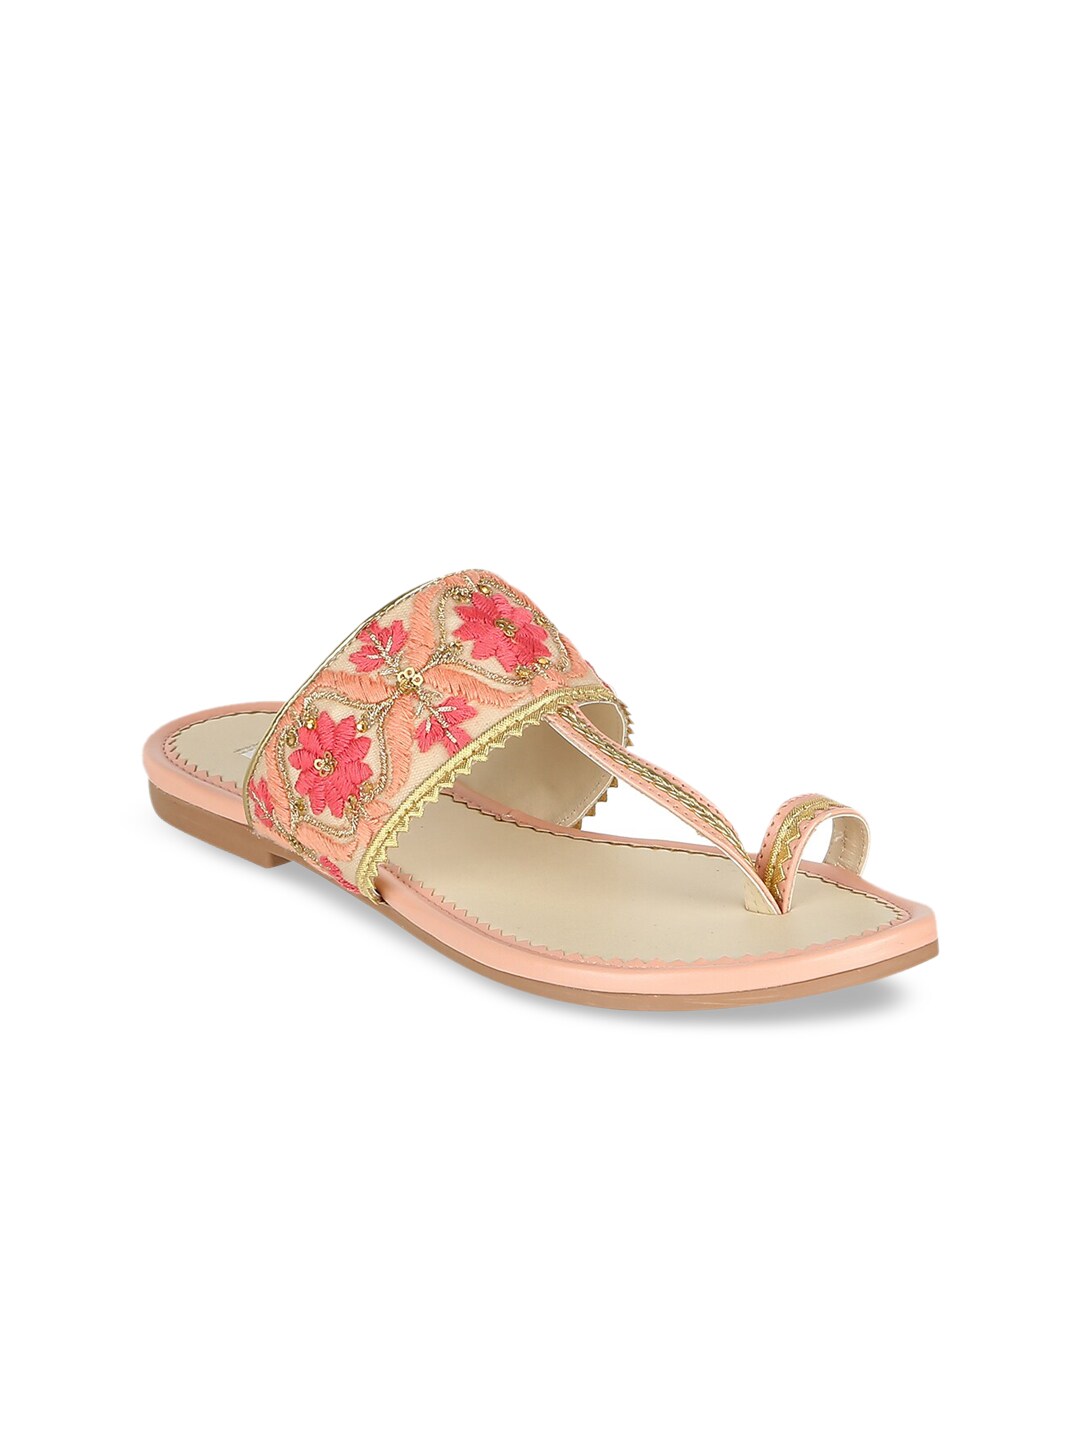 ELLE Women Pink Woven Design One Toe Flats Price in India